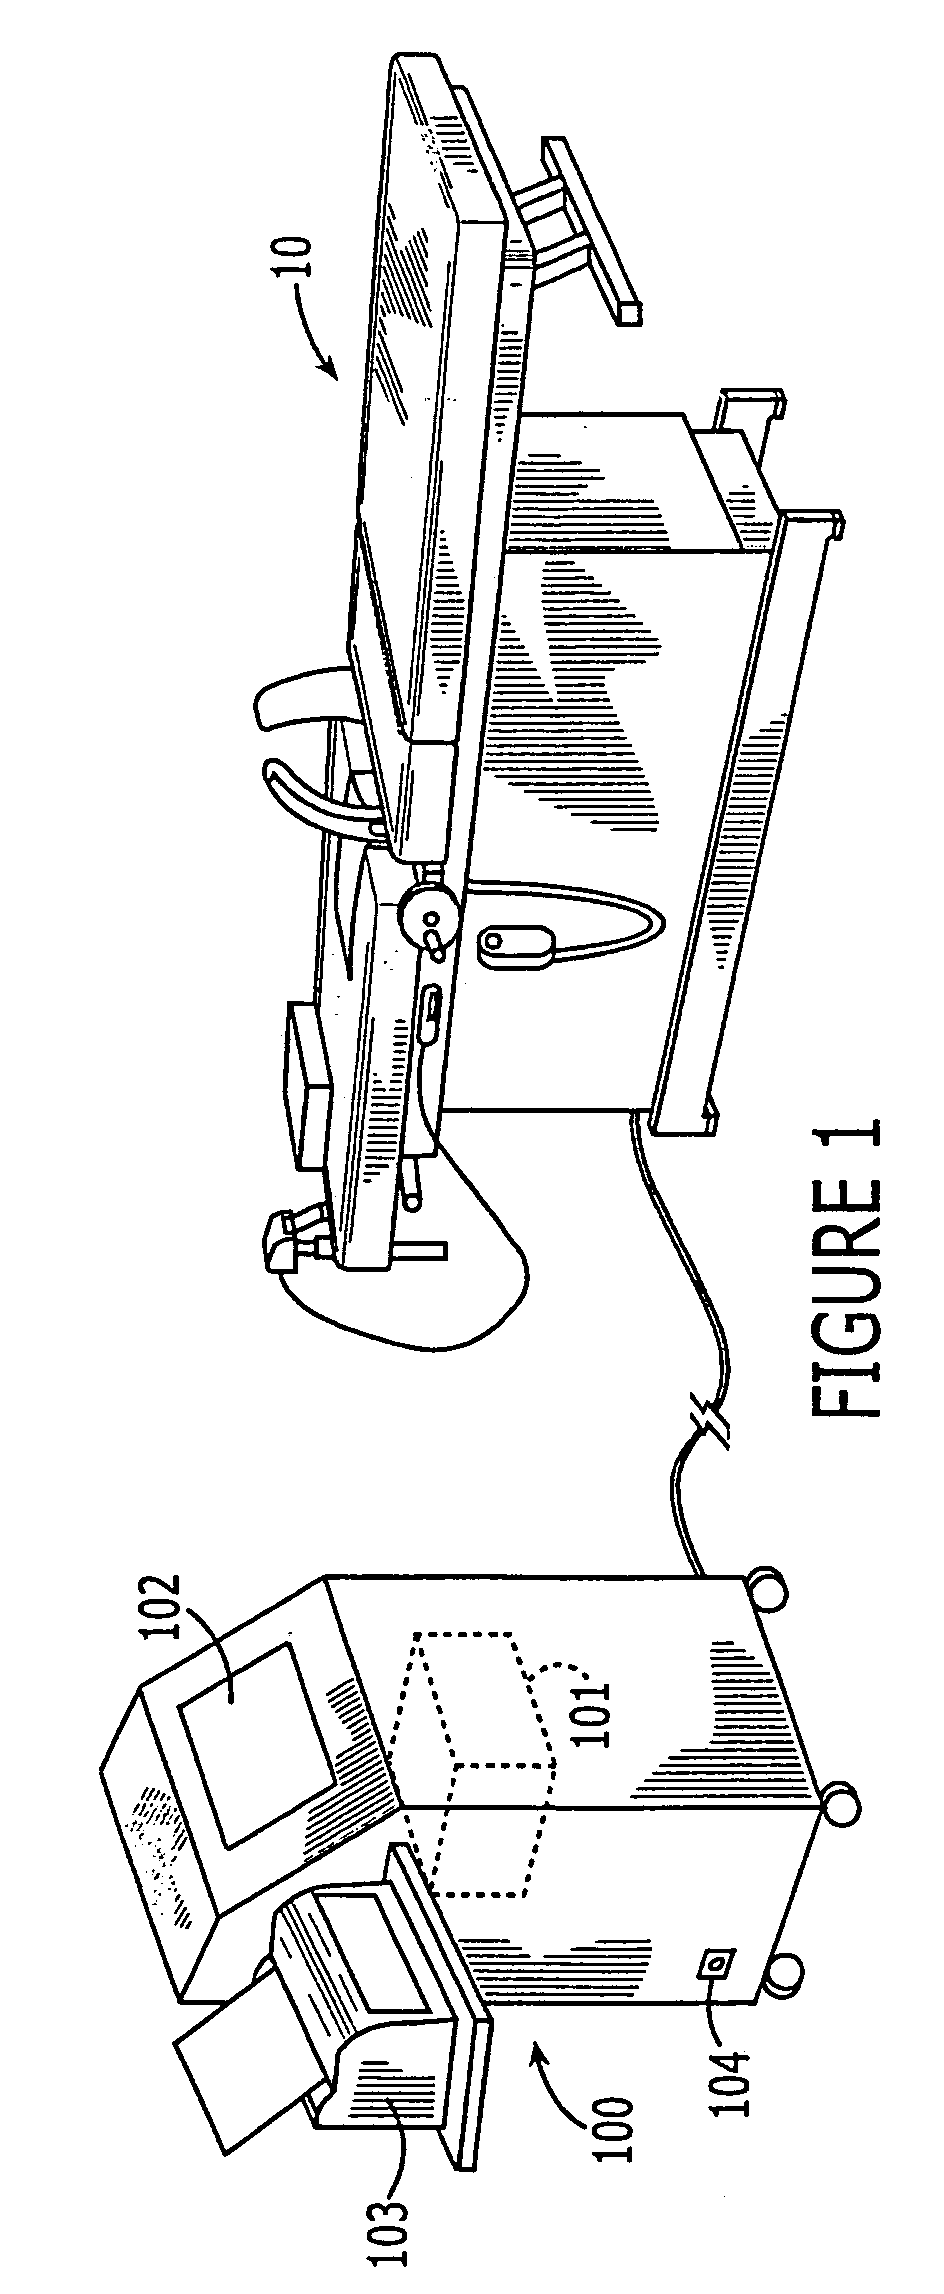 Method and apparatus for therapeutic treatment of back pain